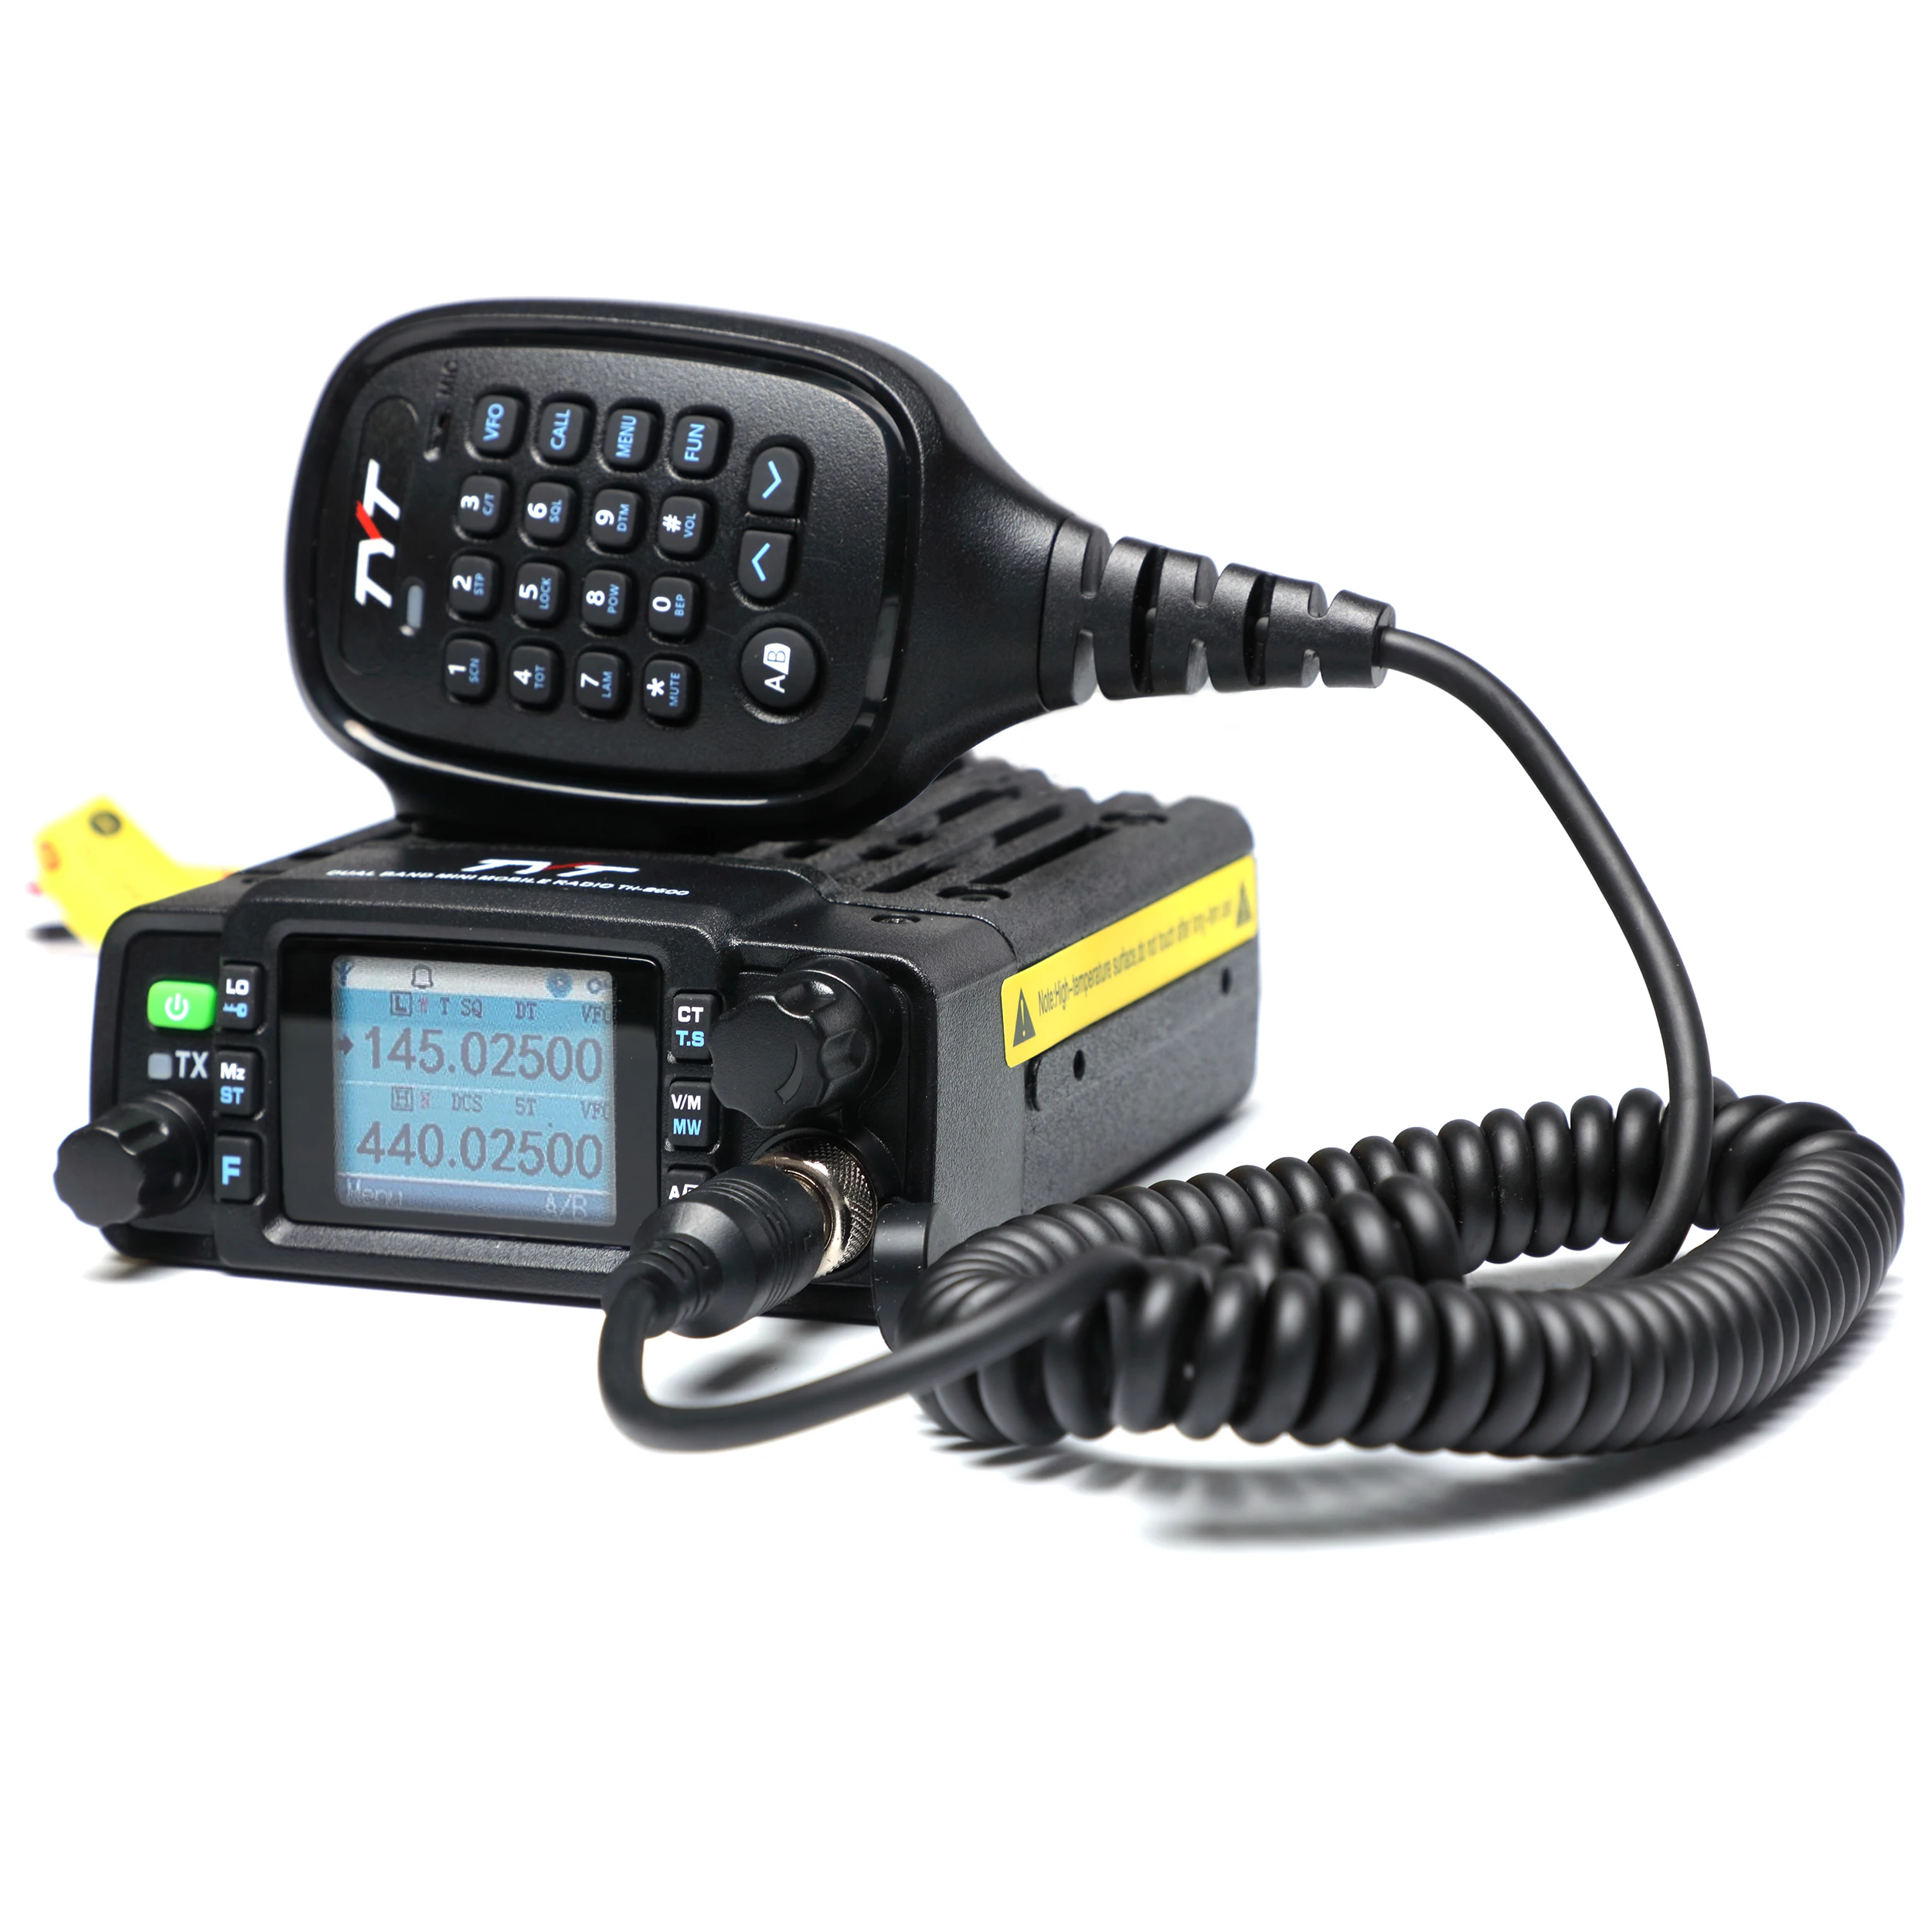 

Amateur Dual Band Radio Long Range VHF/UHF 136-174/400-480MHz Transceiver w/ Programming Cable TYT TH-8600